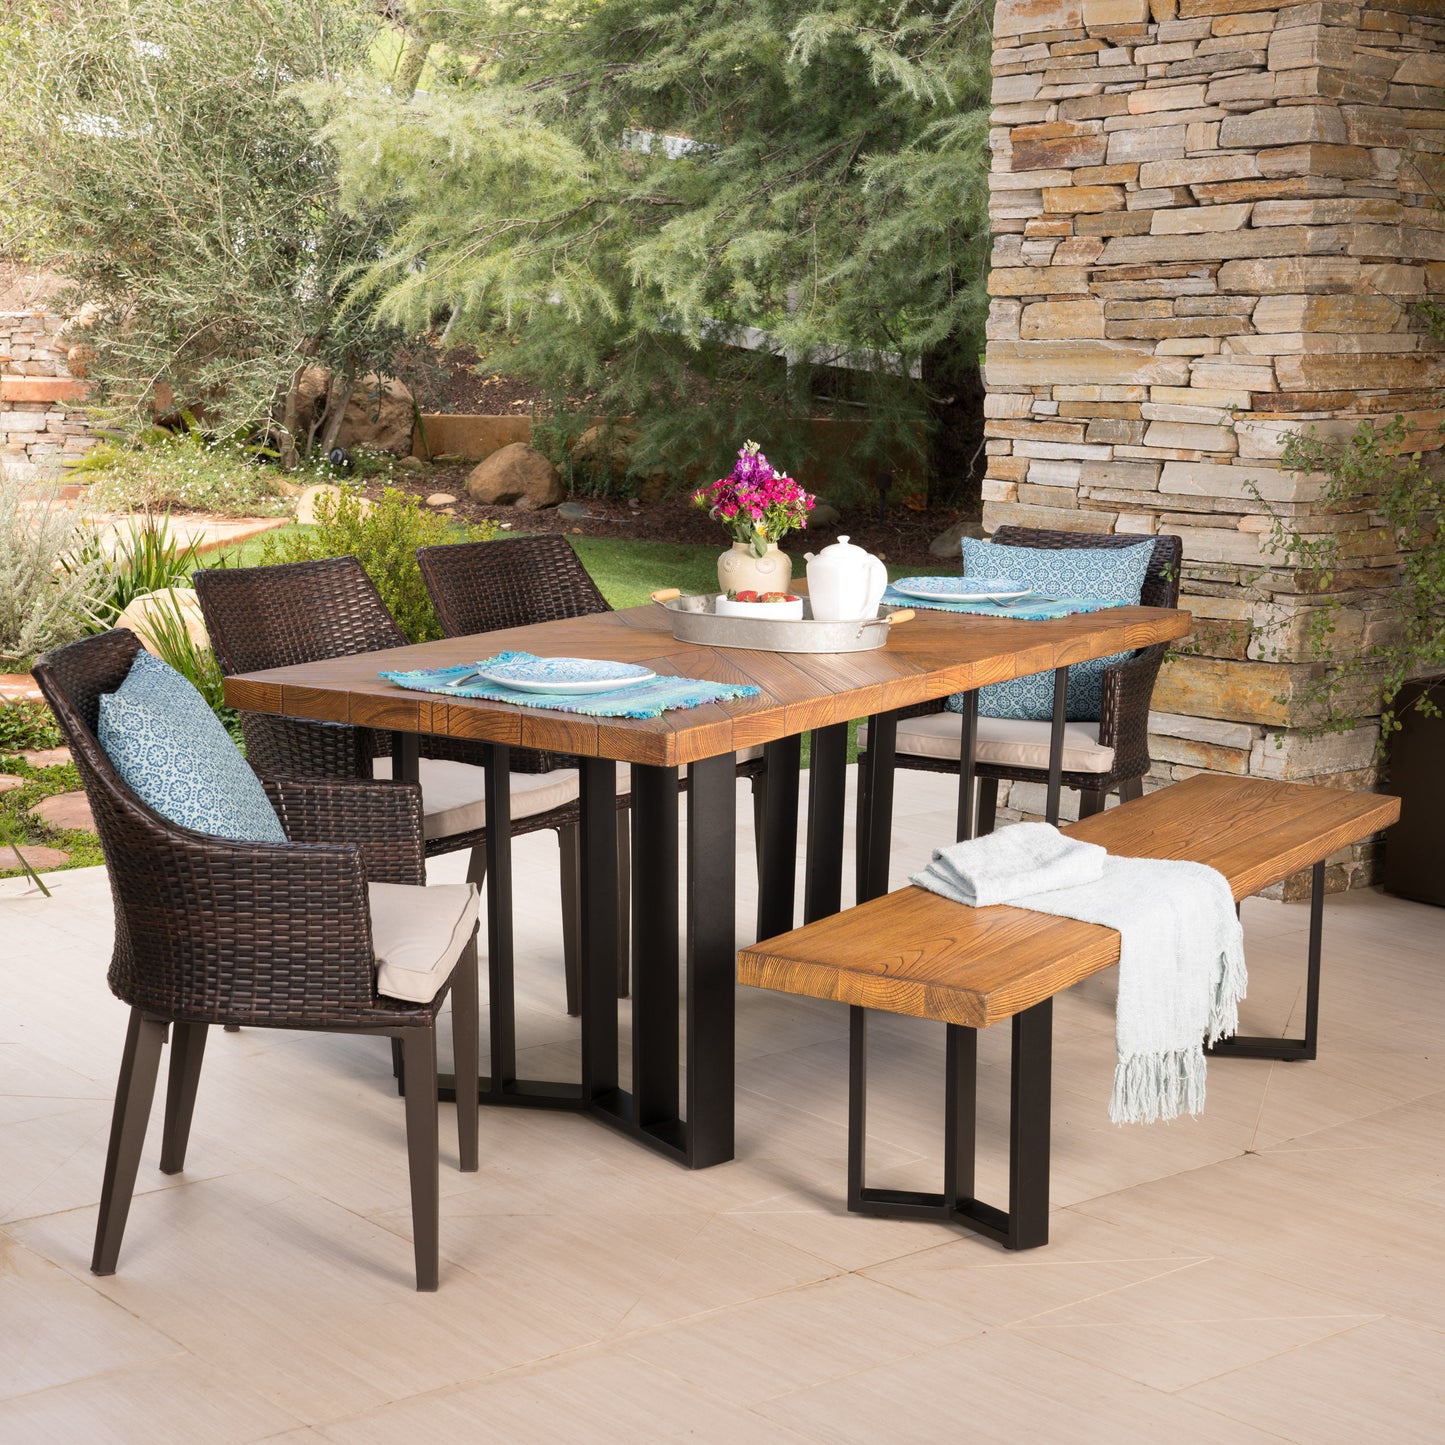 Valby Outdoor 6 Piece Wicker Dining Set with Concrete Dining Table and Bench